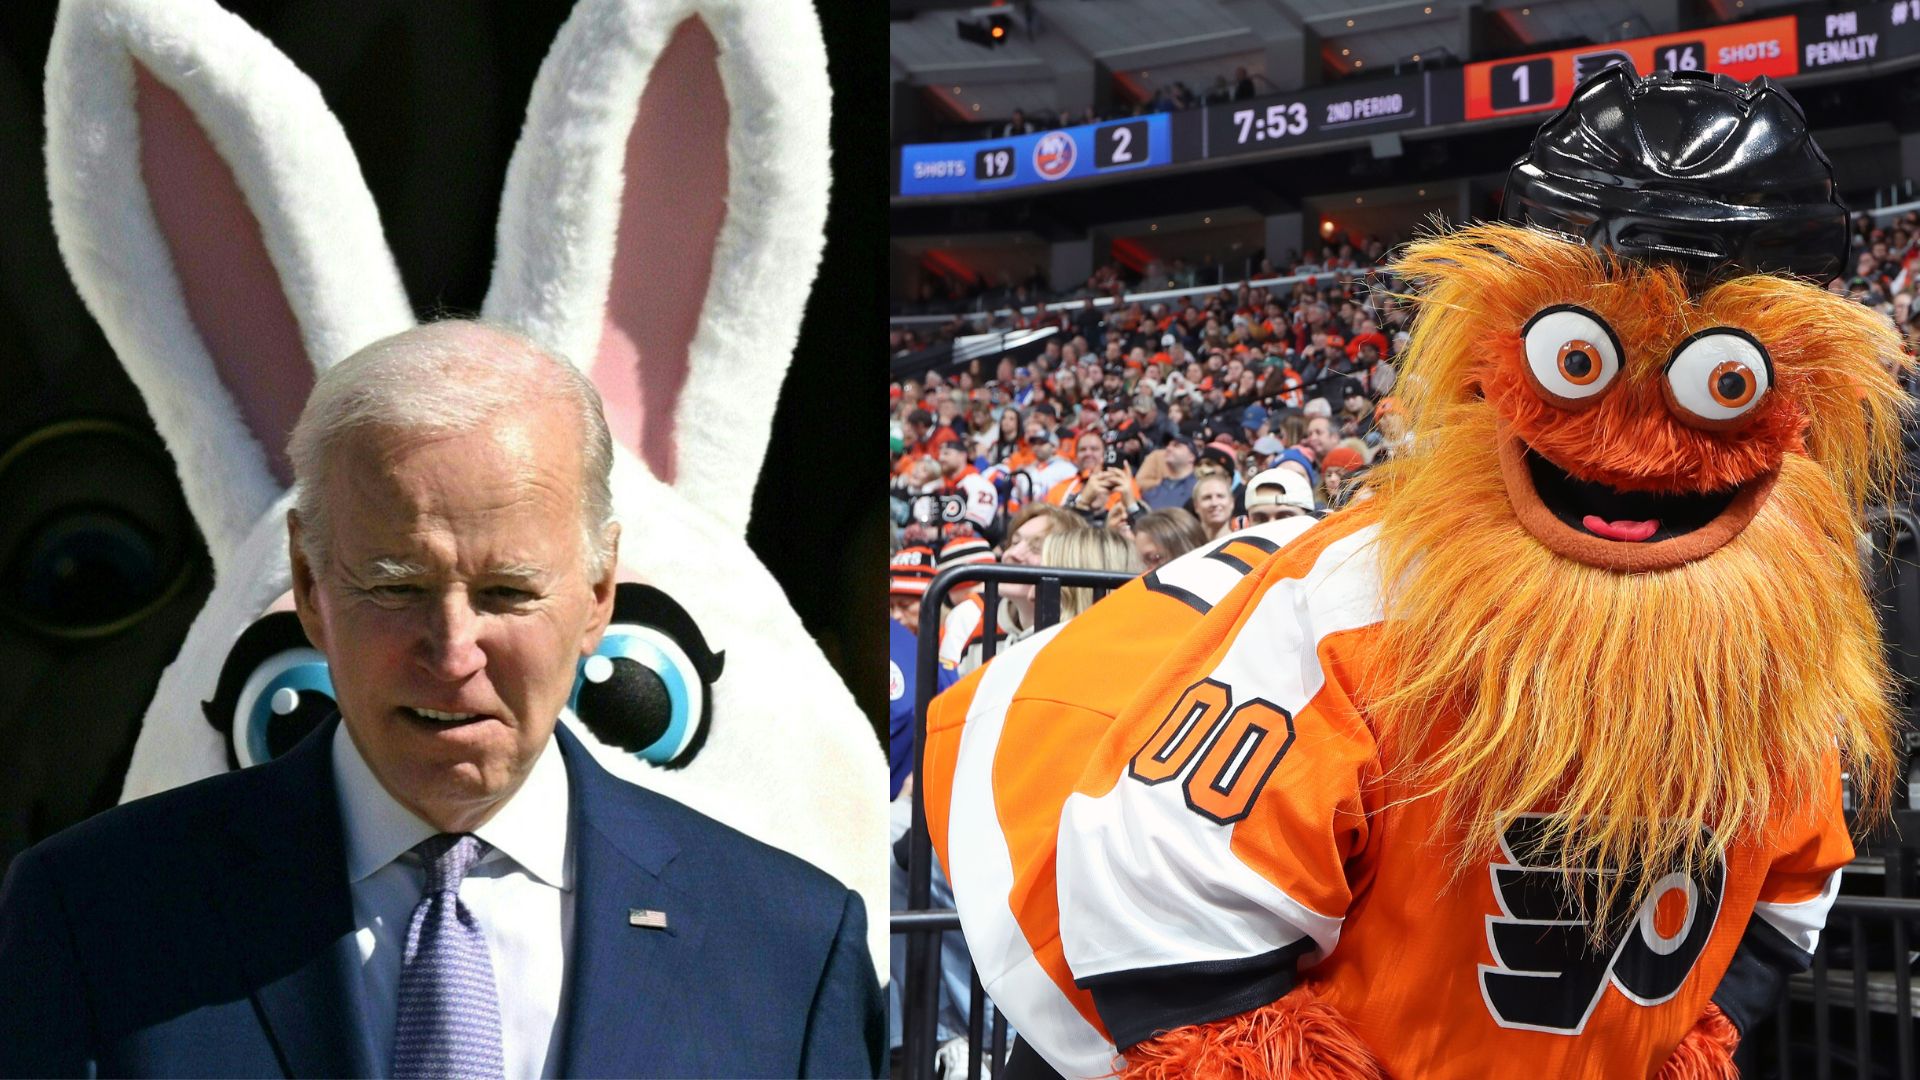 Why Did Gritty Have To Twerk At The White House Easter Egg Roll?